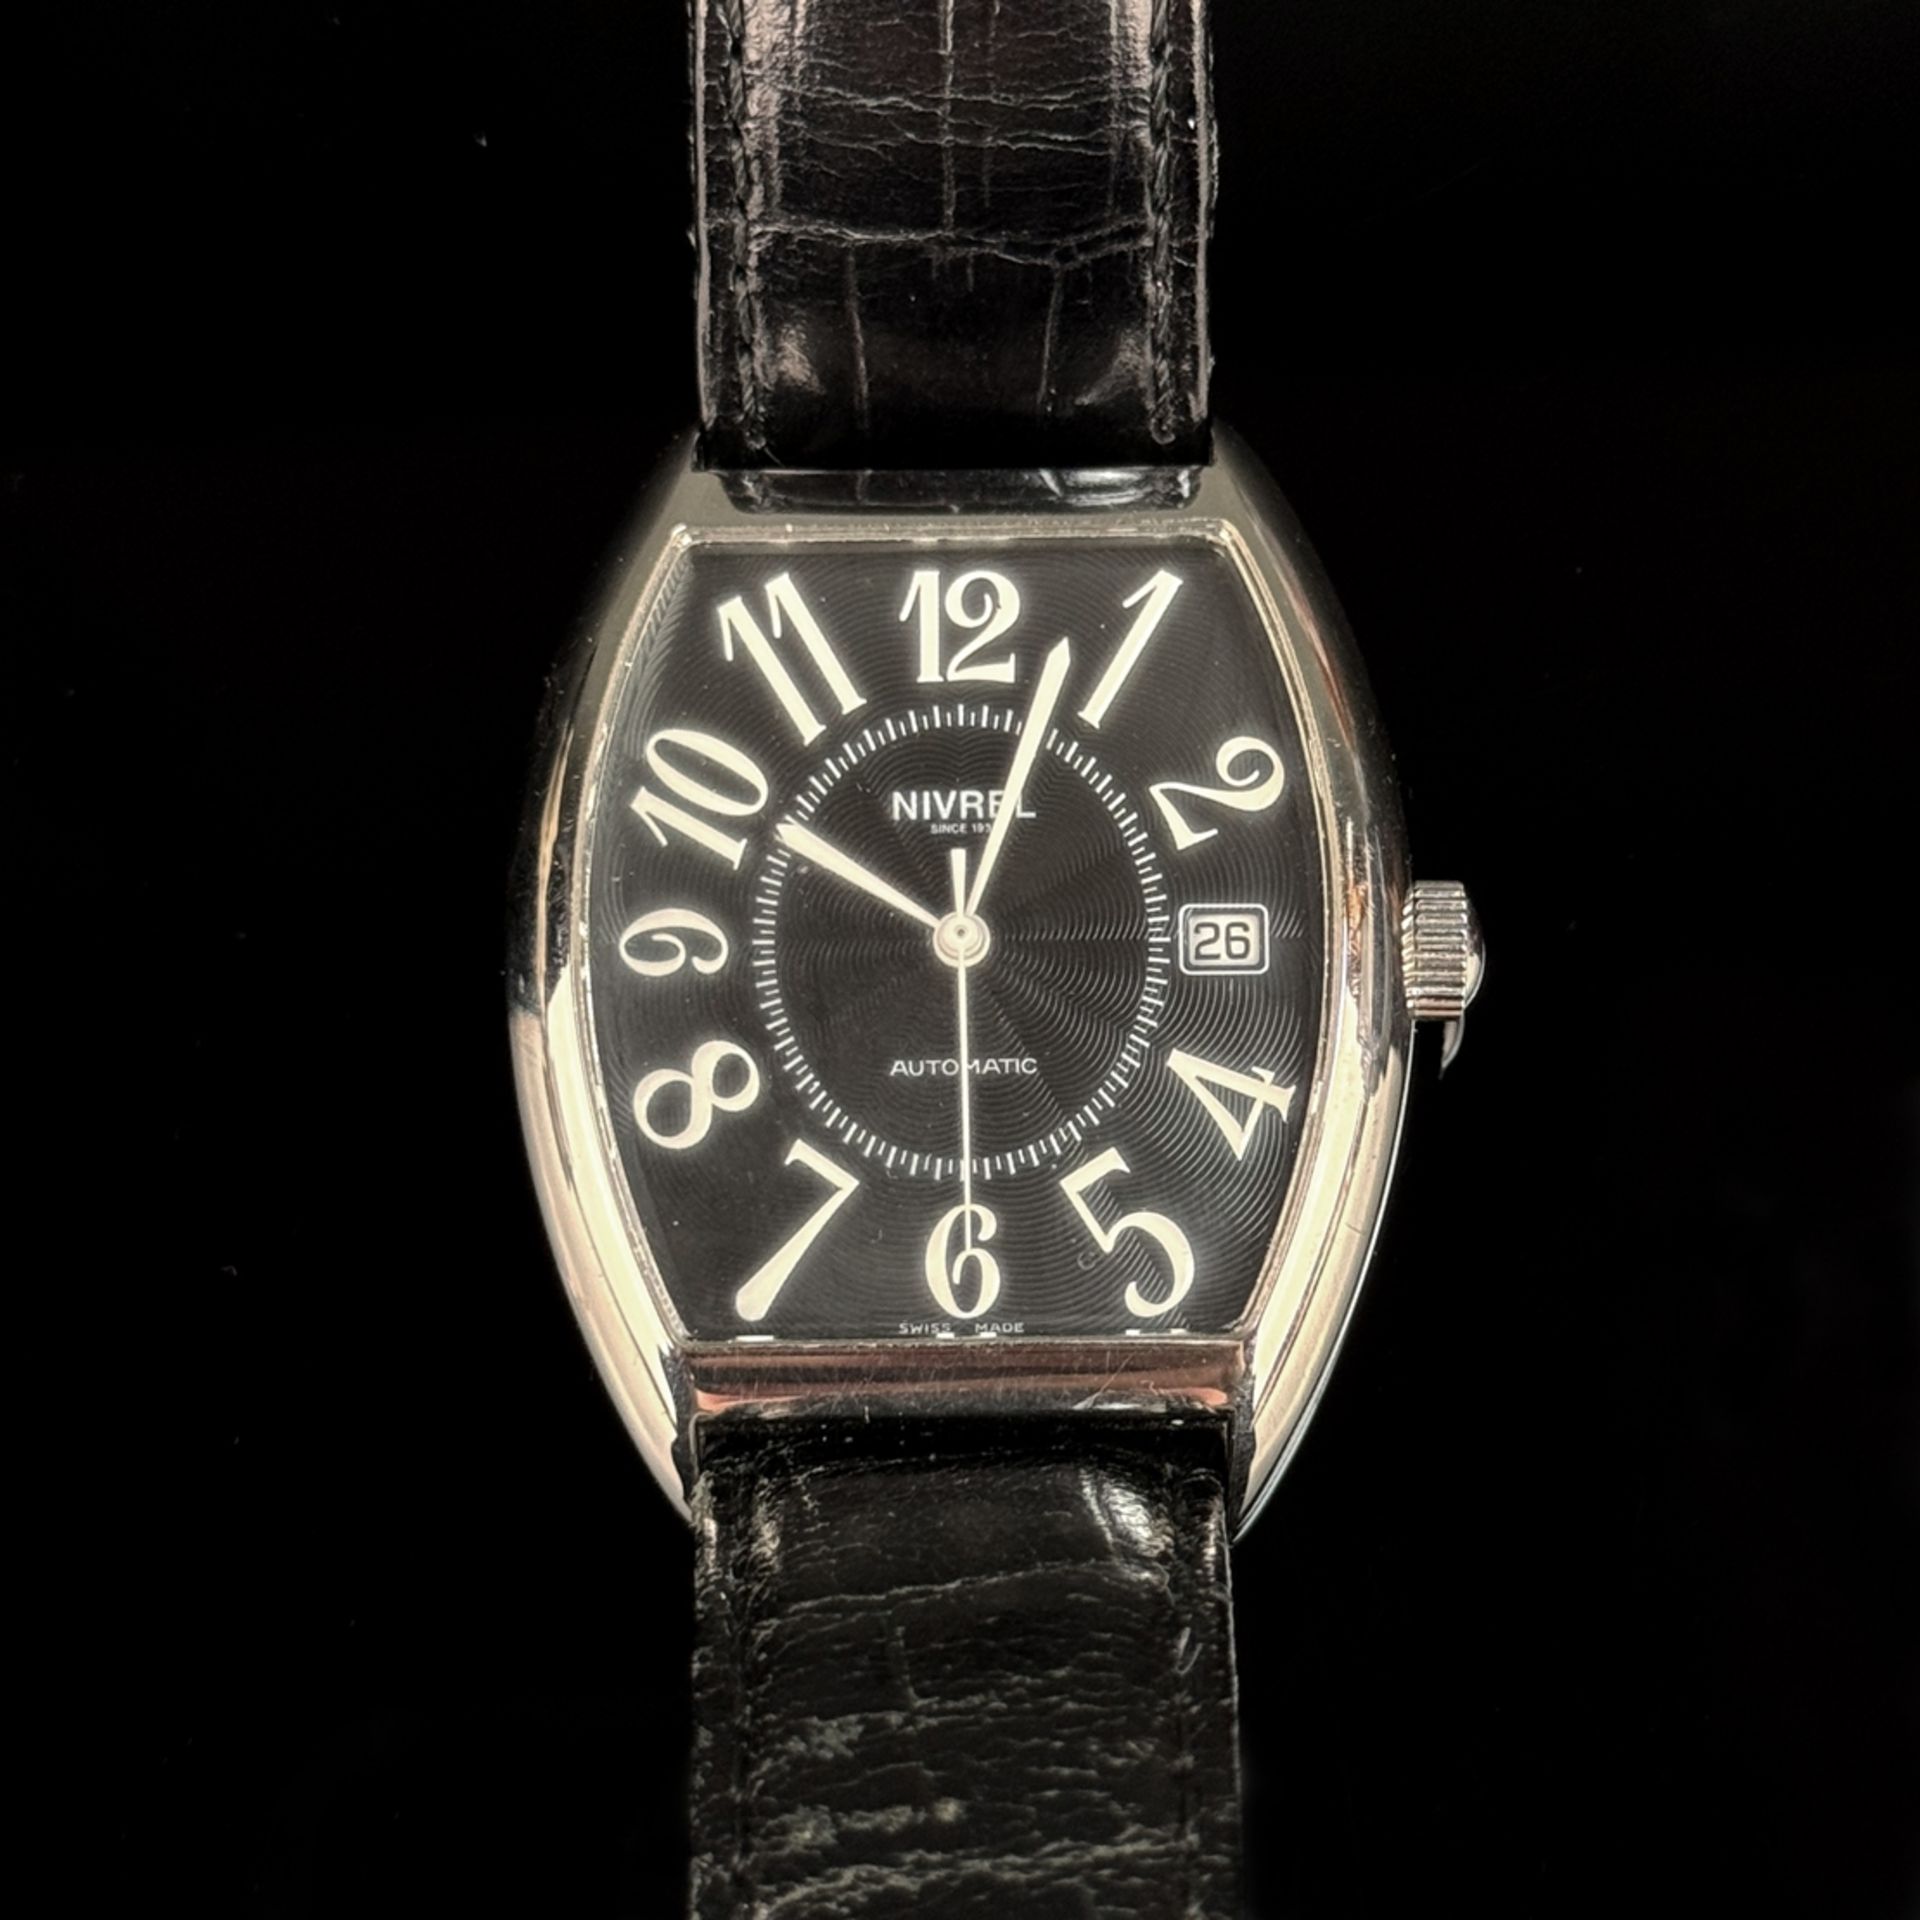 Wristwatch, Nivrel Automatic, "Tonneau" with centre seconds and date, steel case with glass back, d - Image 2 of 3